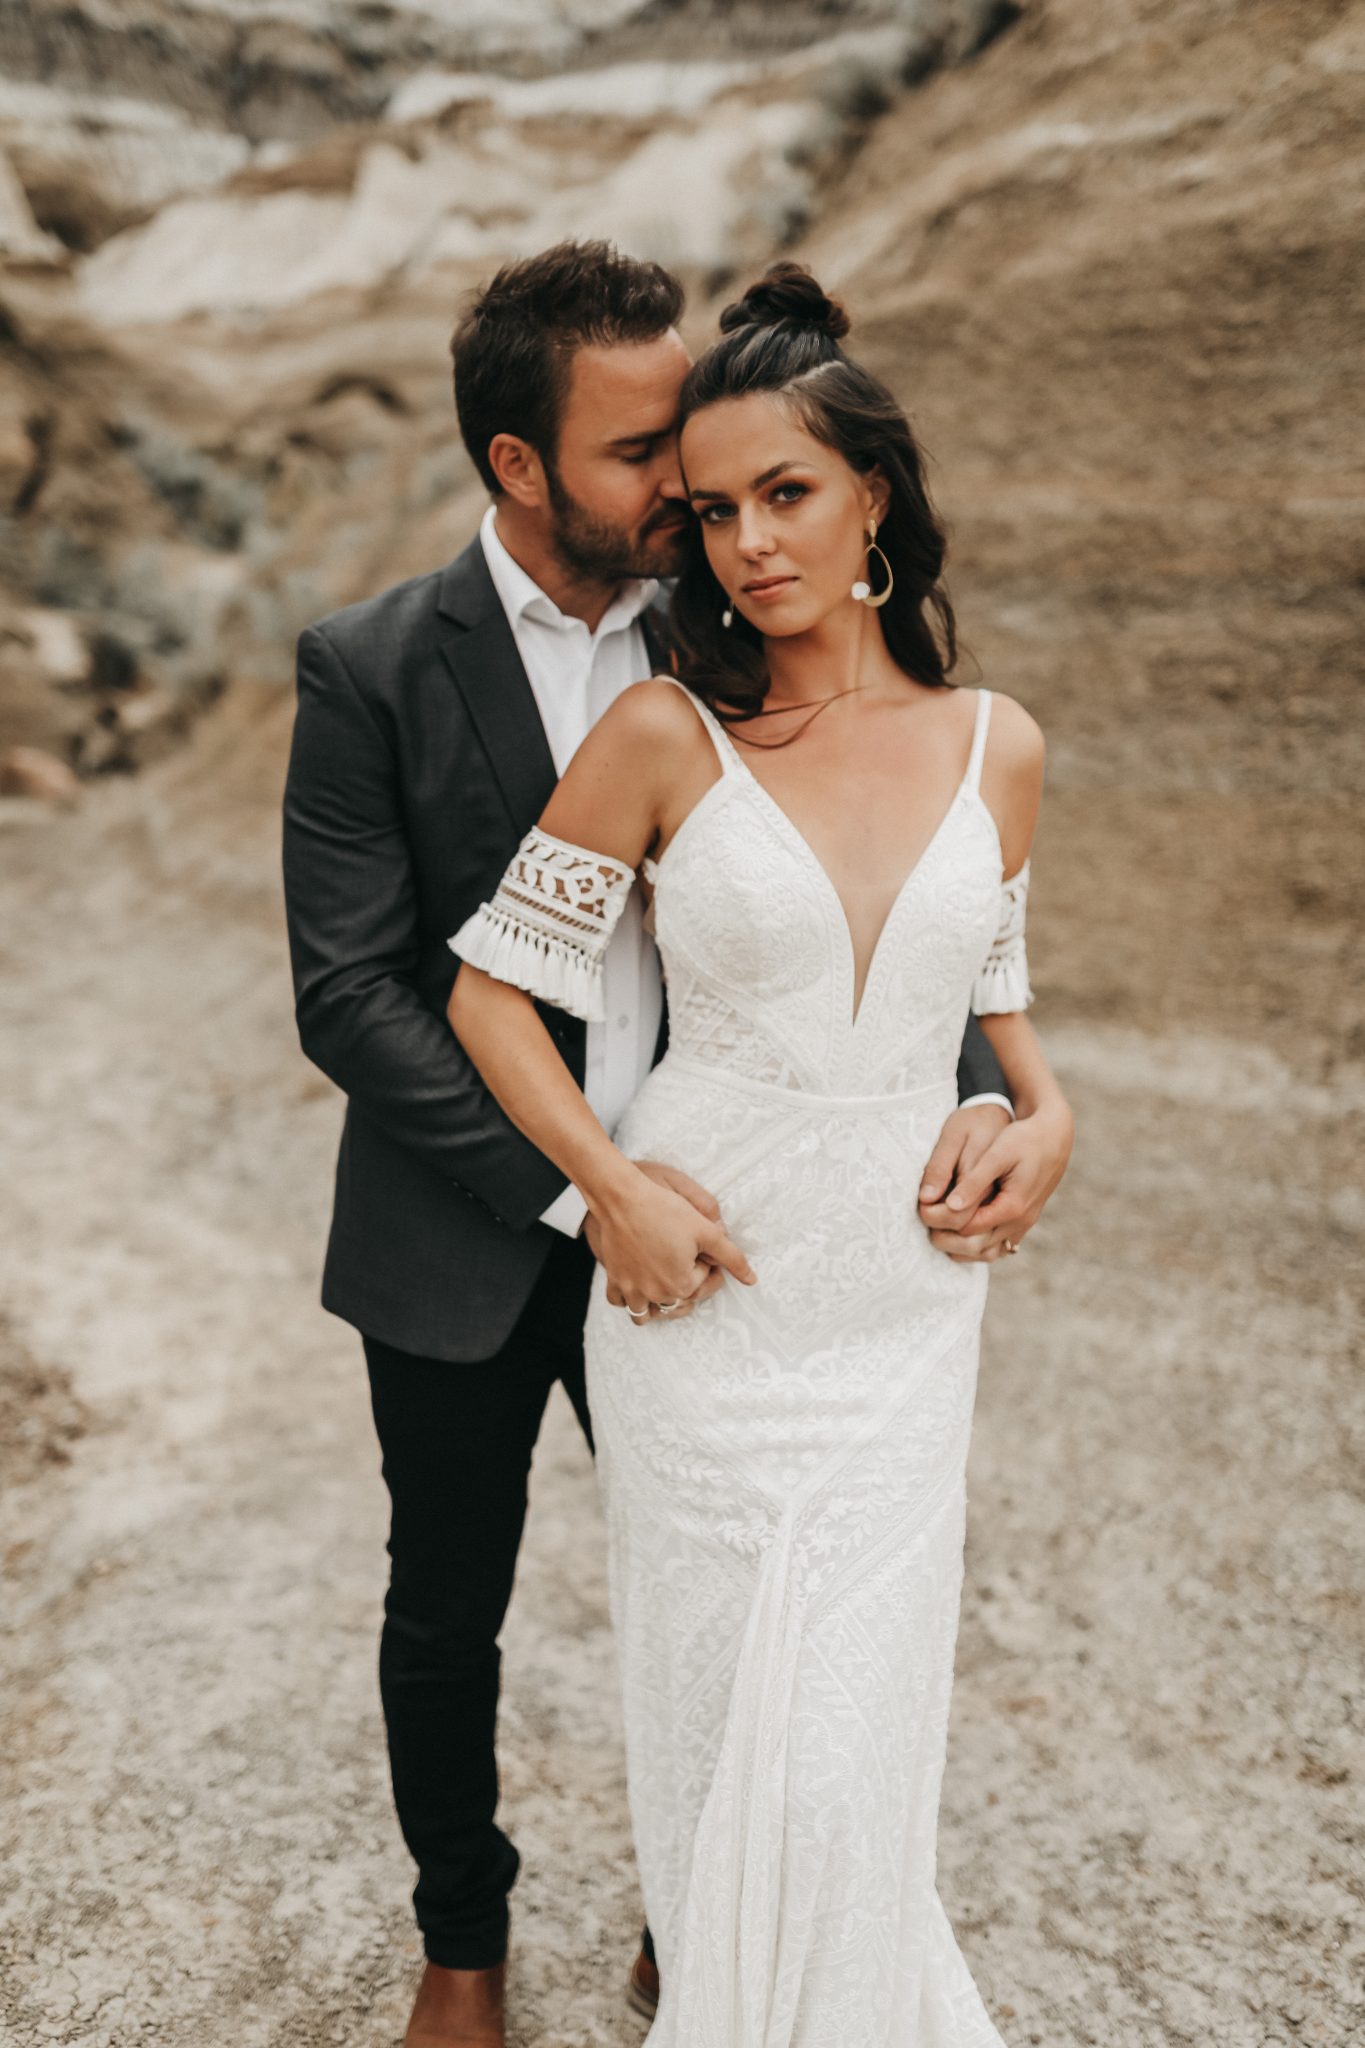 Boho bride poses with her groom for this Moroccan Inspired Elopement featuring lace bridal cuffs